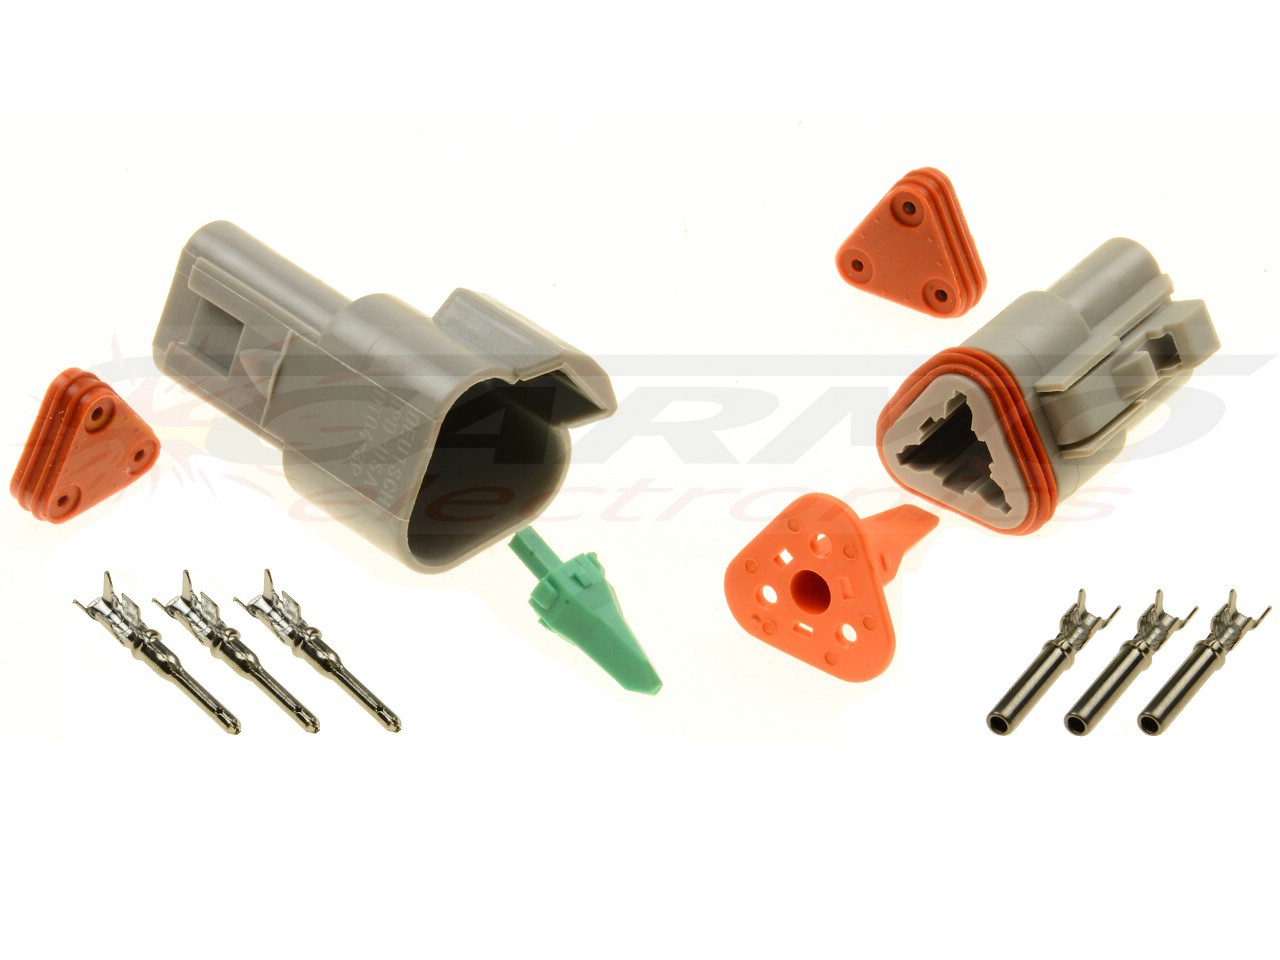 3 pole superseal connector Amphenol - Deutsch DT06-3s DT04-3P - Click Image to Close